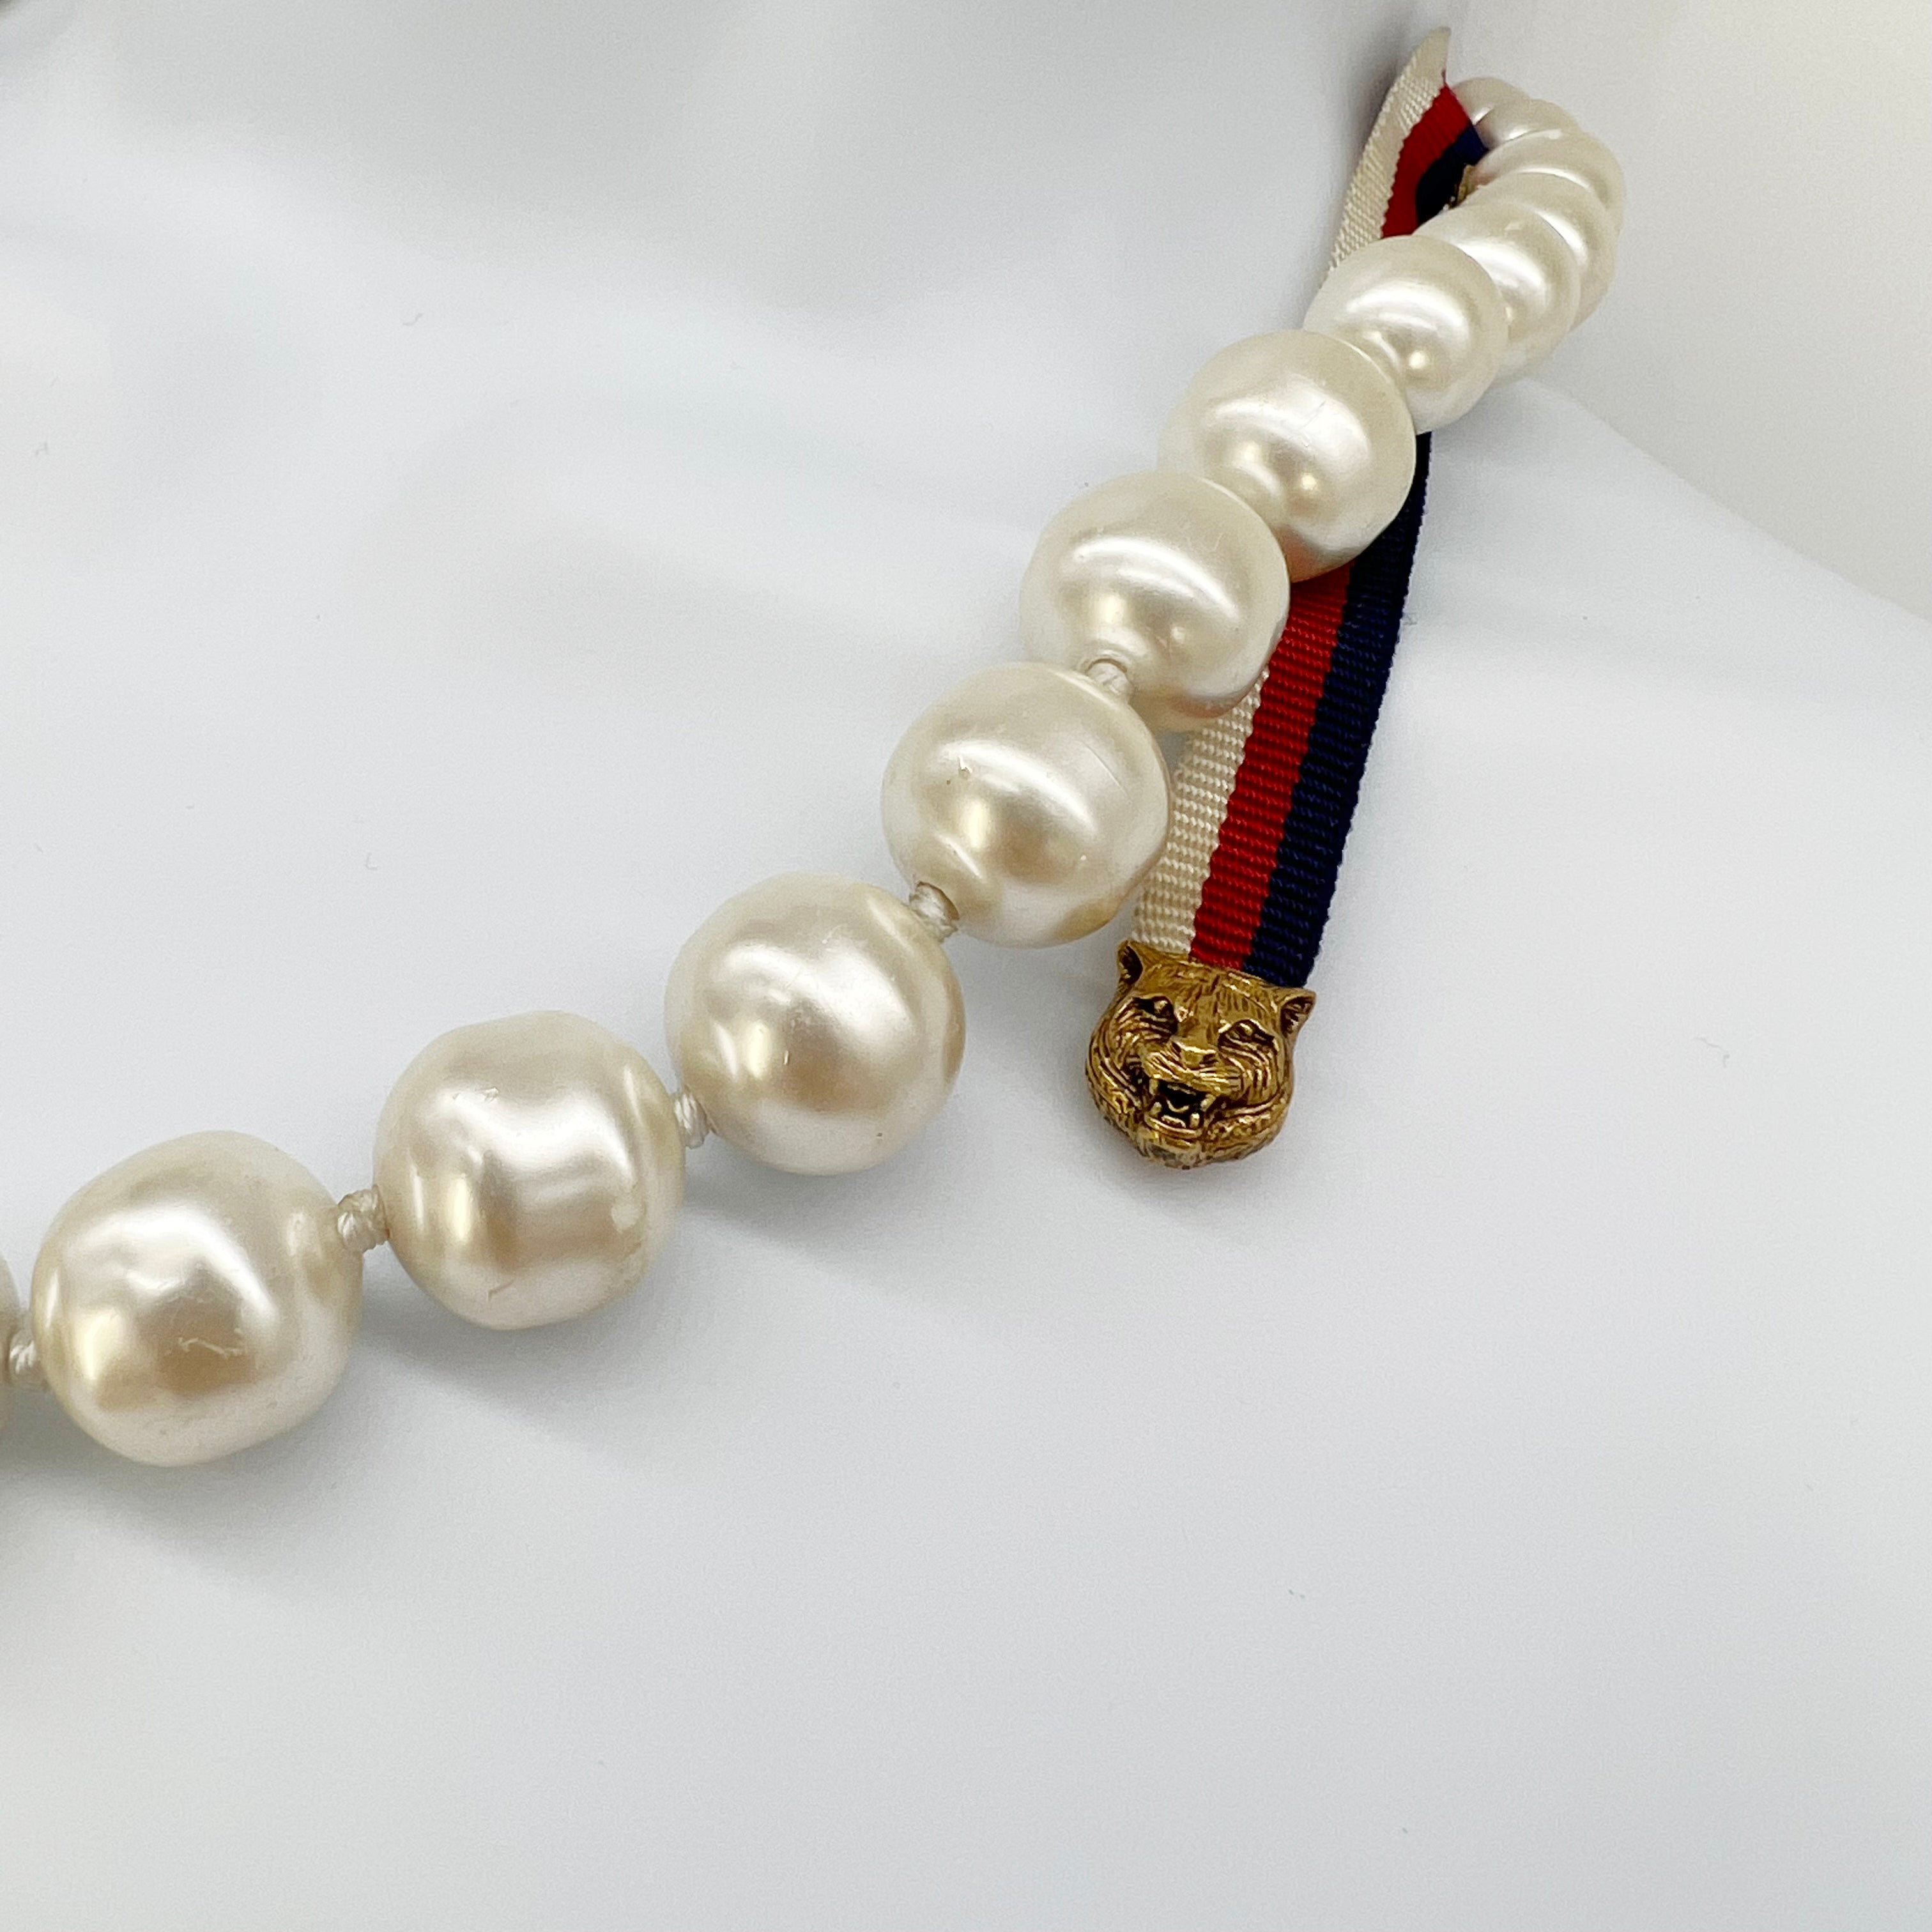 Guaranteed Authentic Gucci Faux Pearl Necklace with Ribbon with Feline Head Appx 10